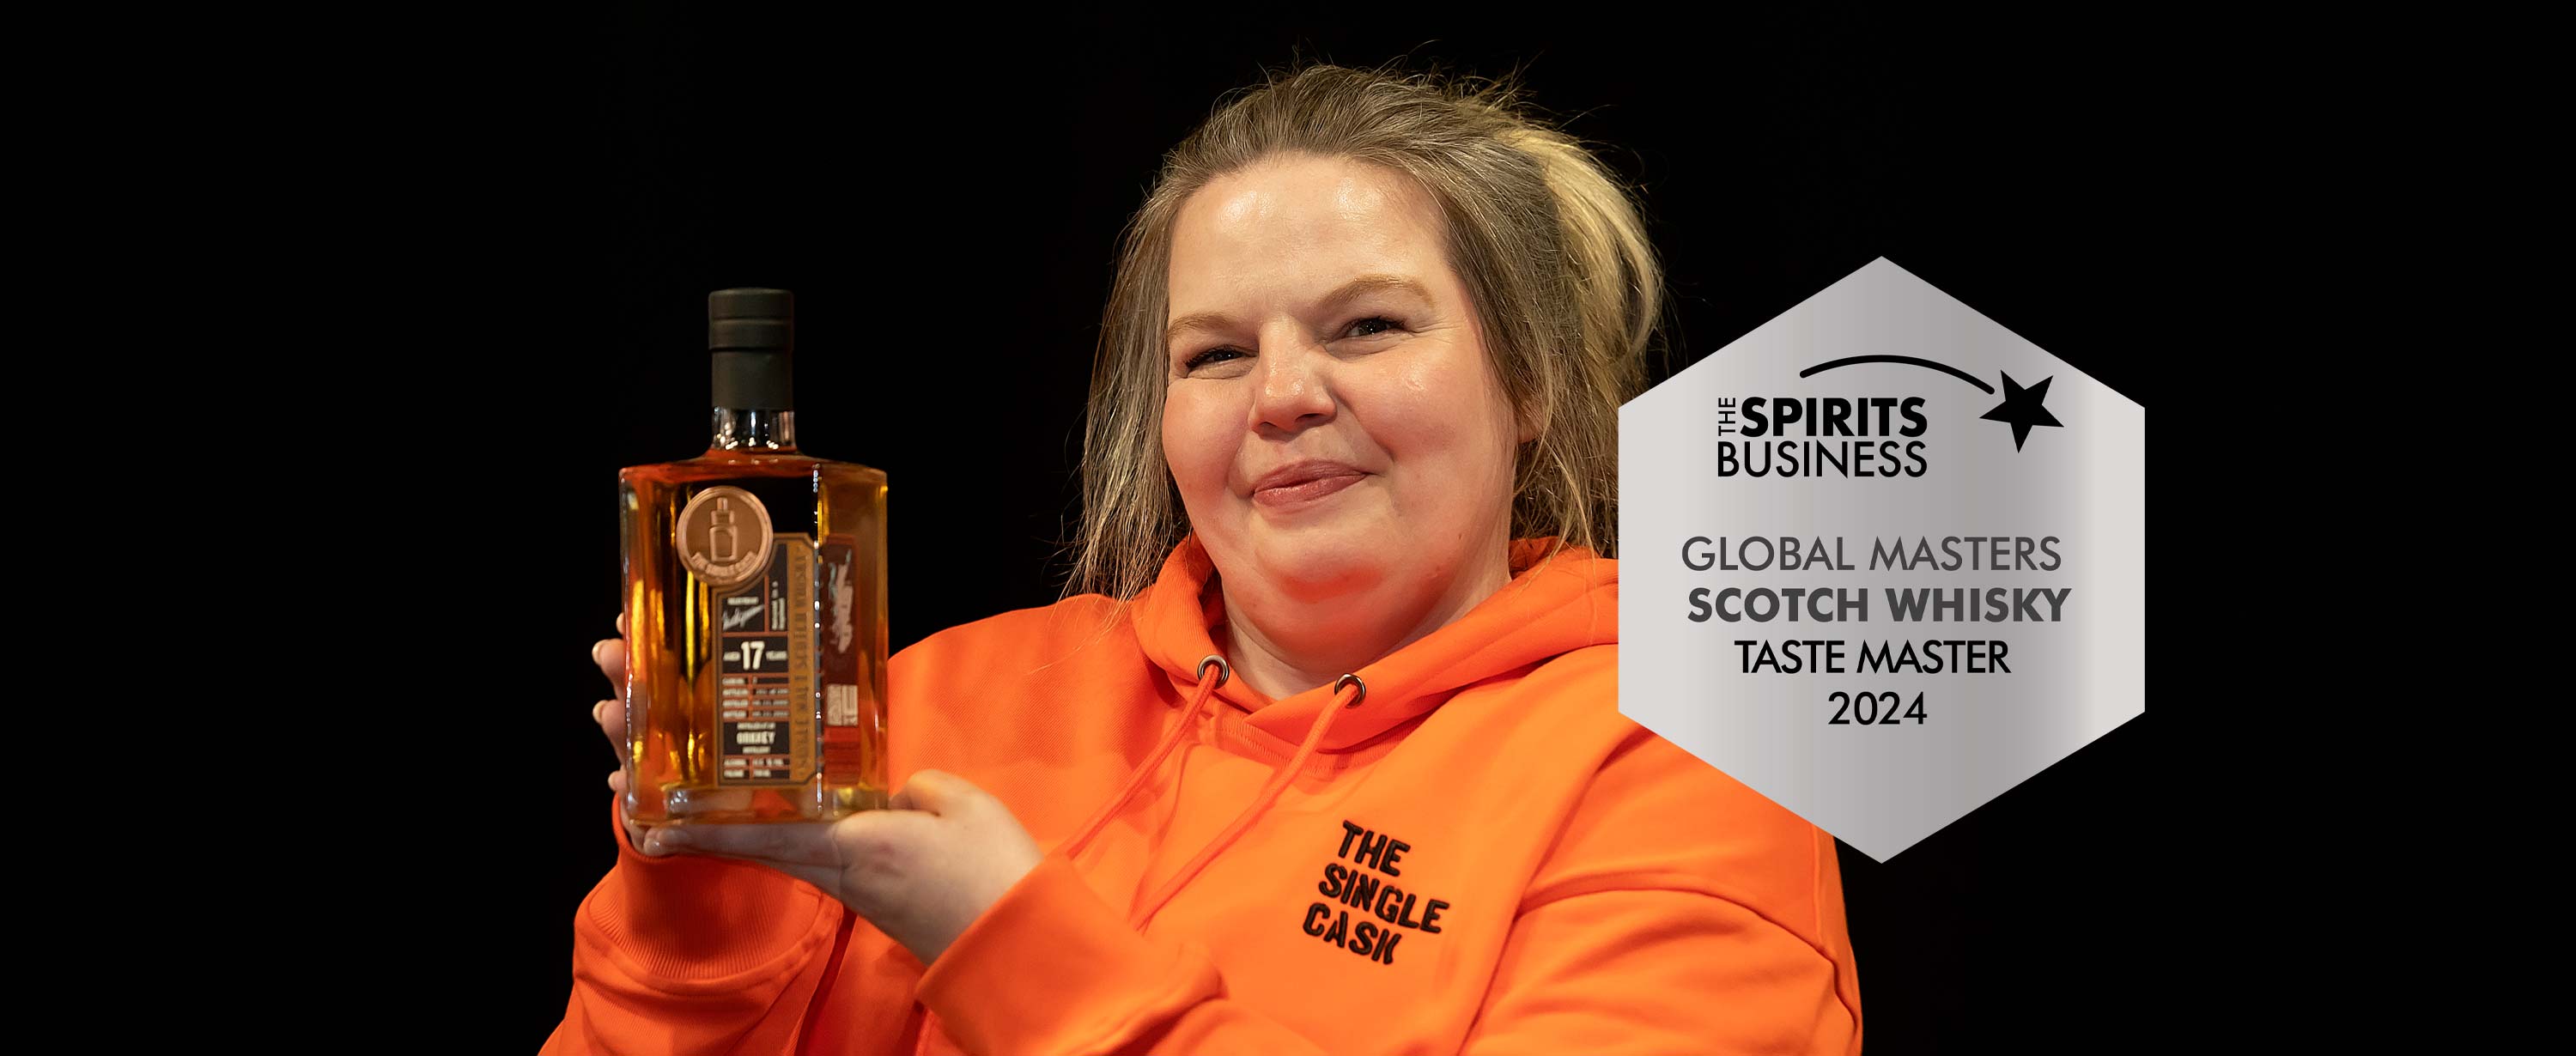 The Single Cask Scoops 10 Medals at Scotch Masters Awards